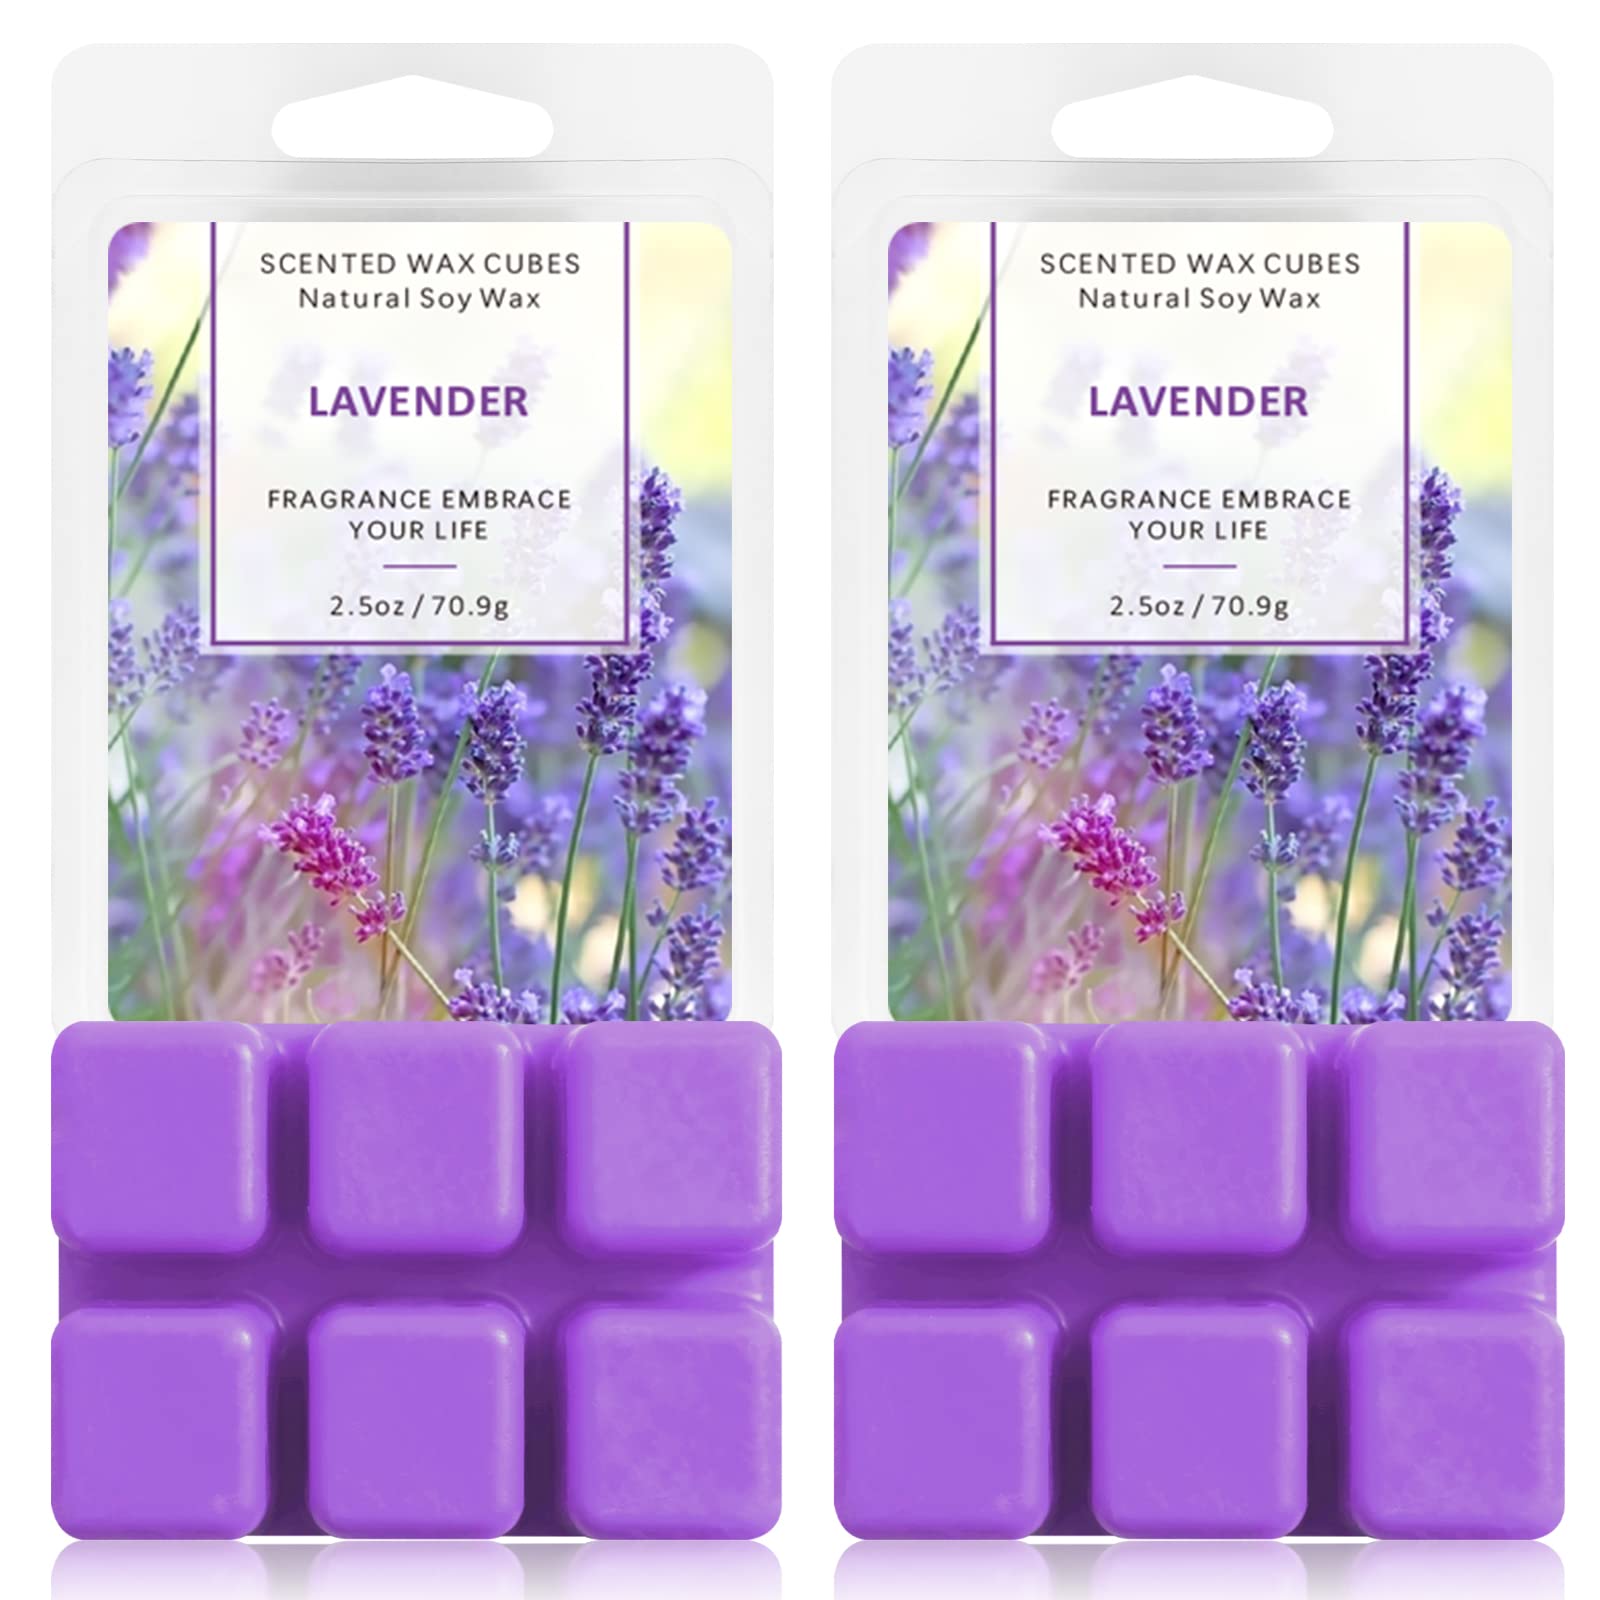 LA BELLEFE Wax Melts Wax Cubes, Lavender Scented Wax Melts for Warmers,  Natural Soy Wax Melts Birthday Gift Set, Scent Wax Cubes for Weddings,  Parties, Spa, Meditation (2.5oz/70.9g*2)